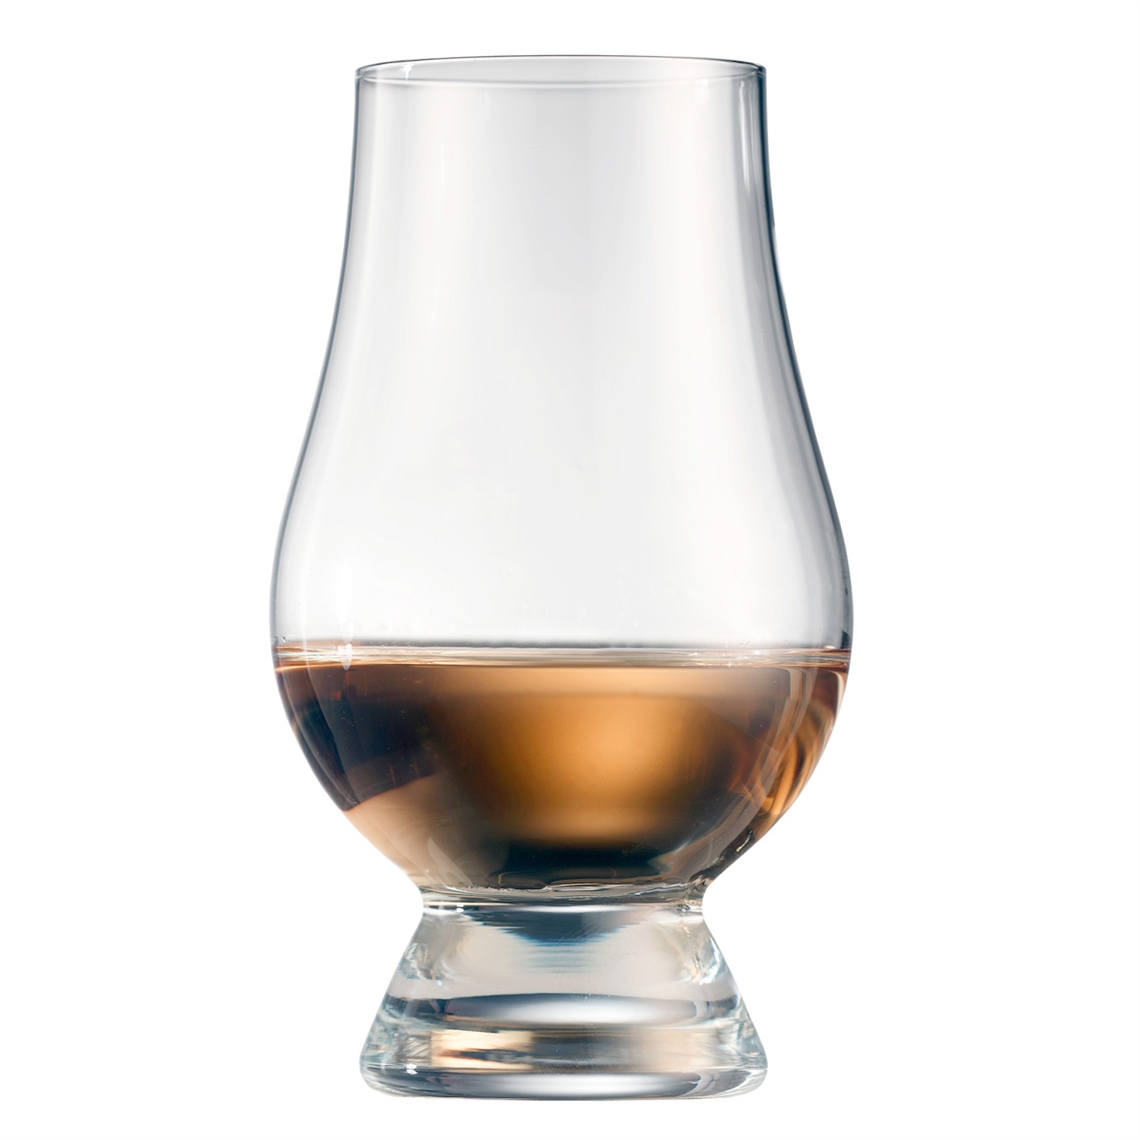 View more starlight from our Whisky Glasses range